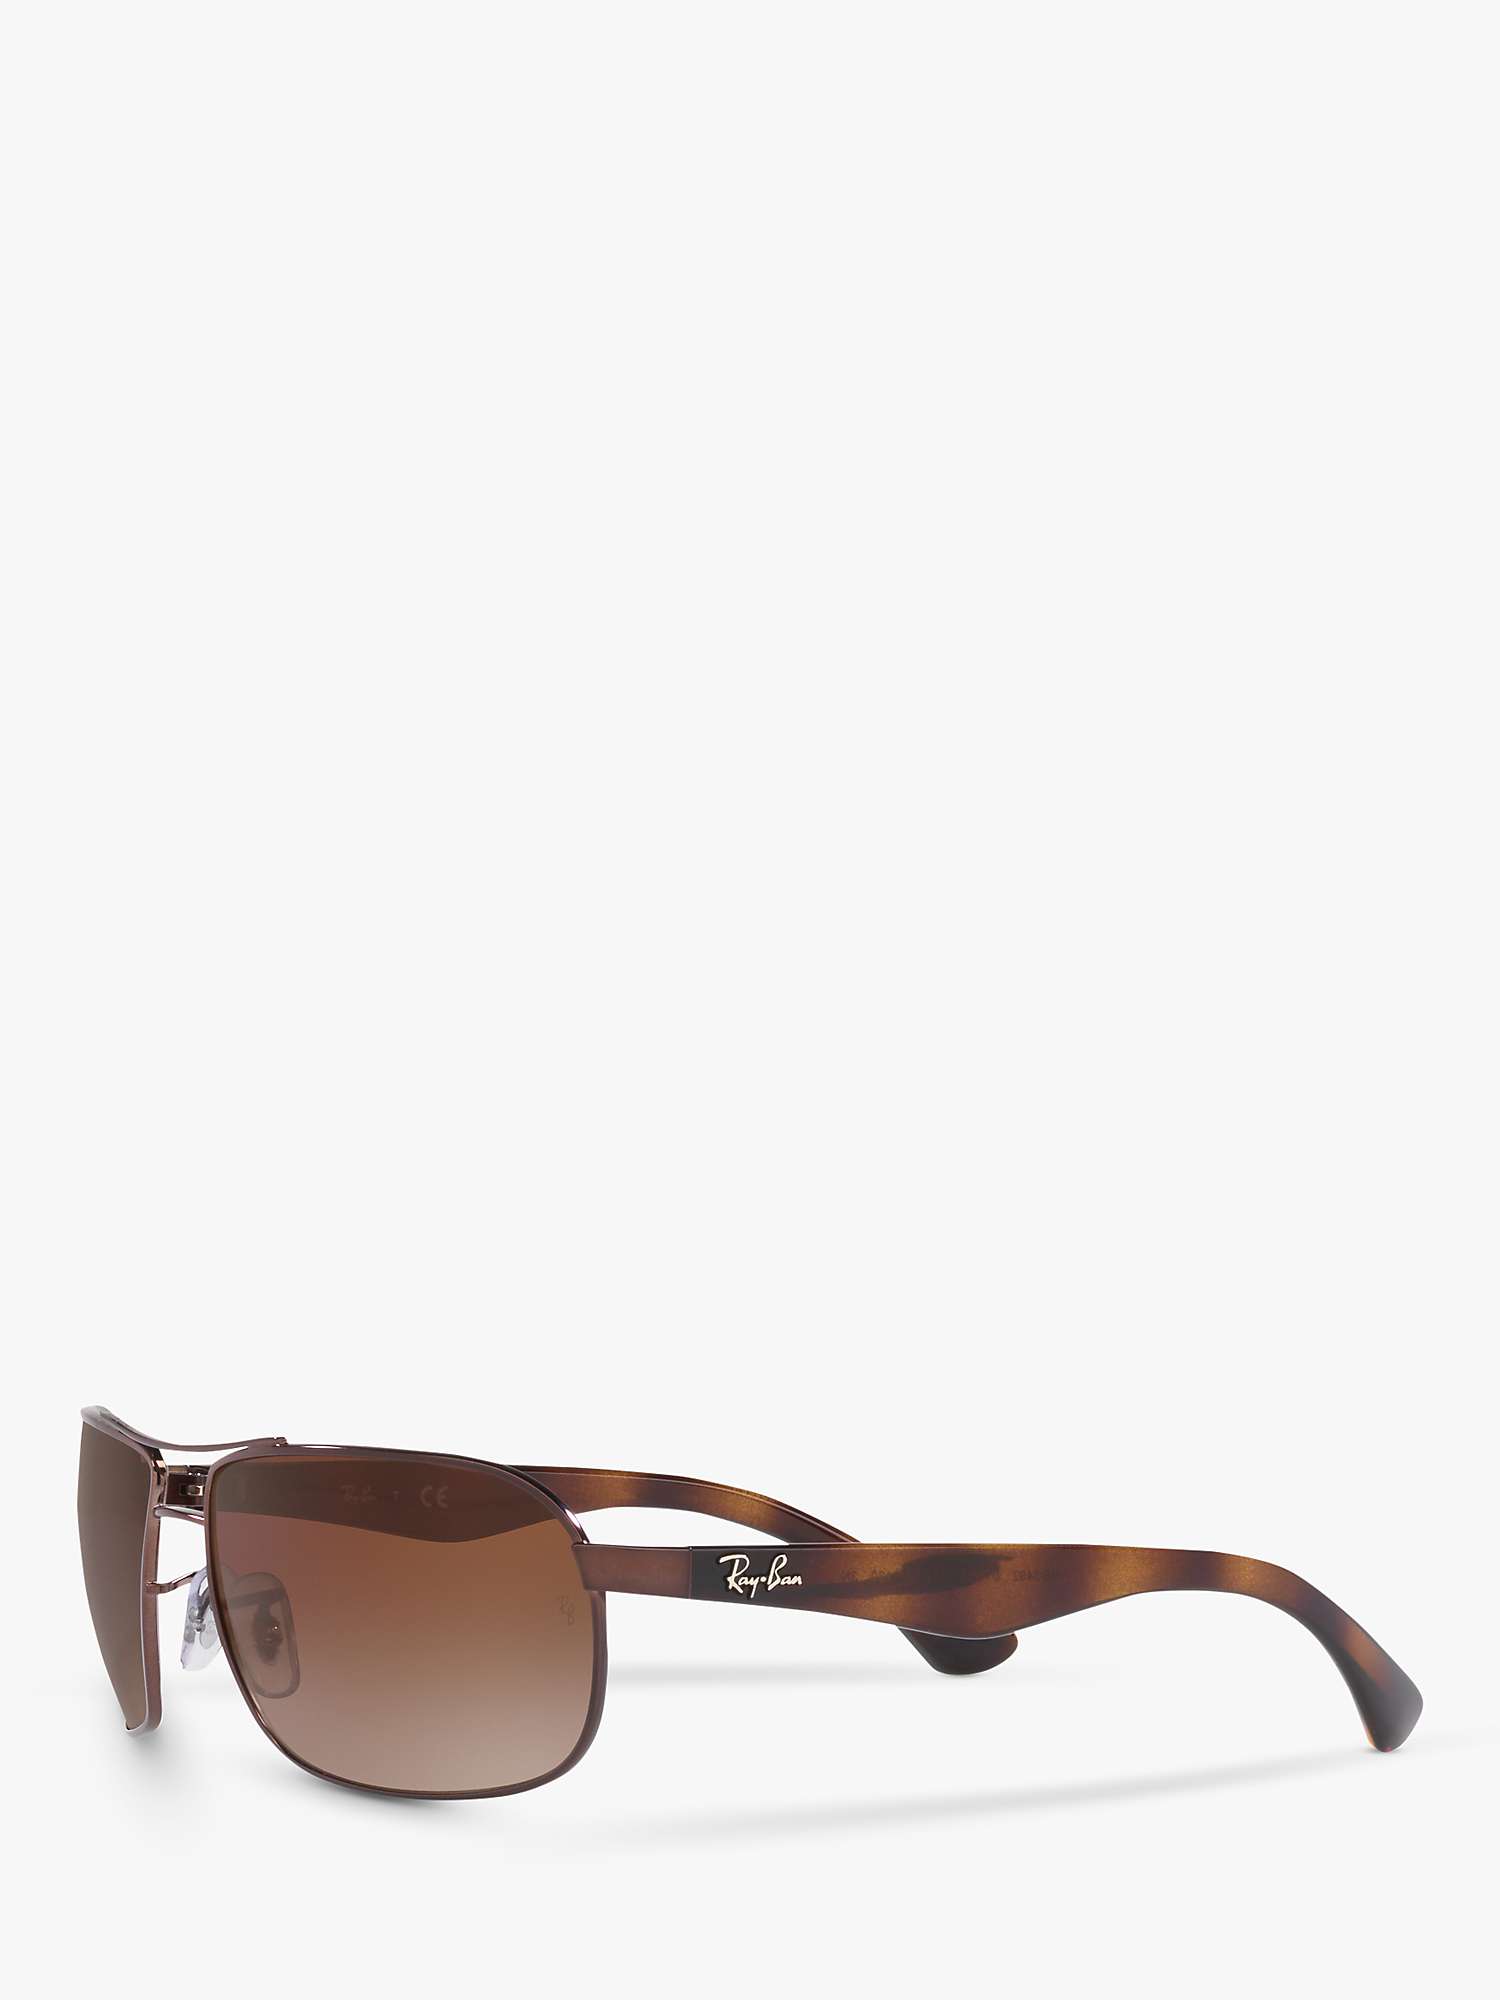 Buy Ray-Ban RB3492 Men's Square Sunglassess, Brown Online at johnlewis.com